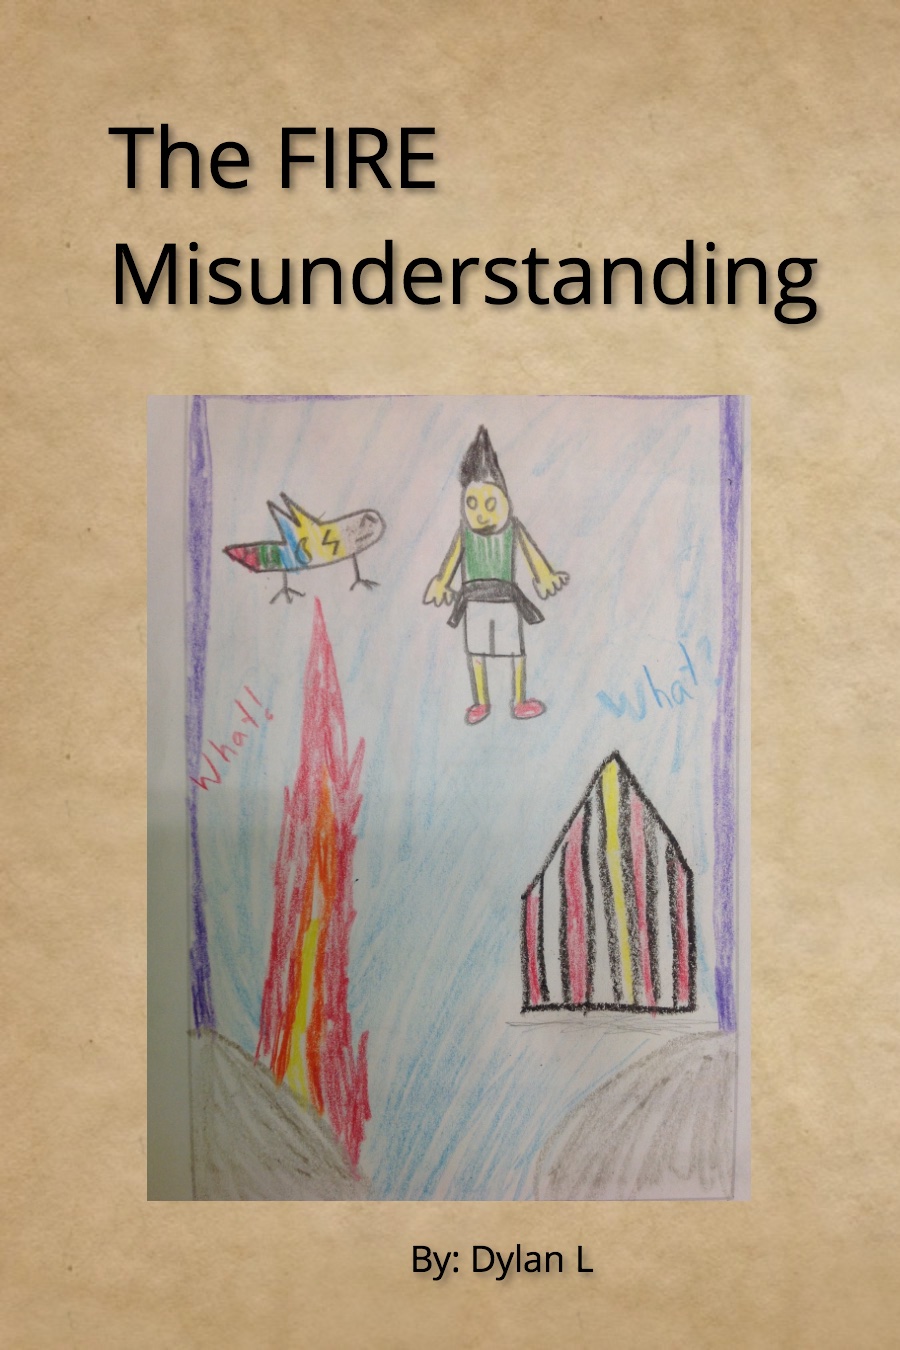 The FIRE Misunderstanding by Dylan L